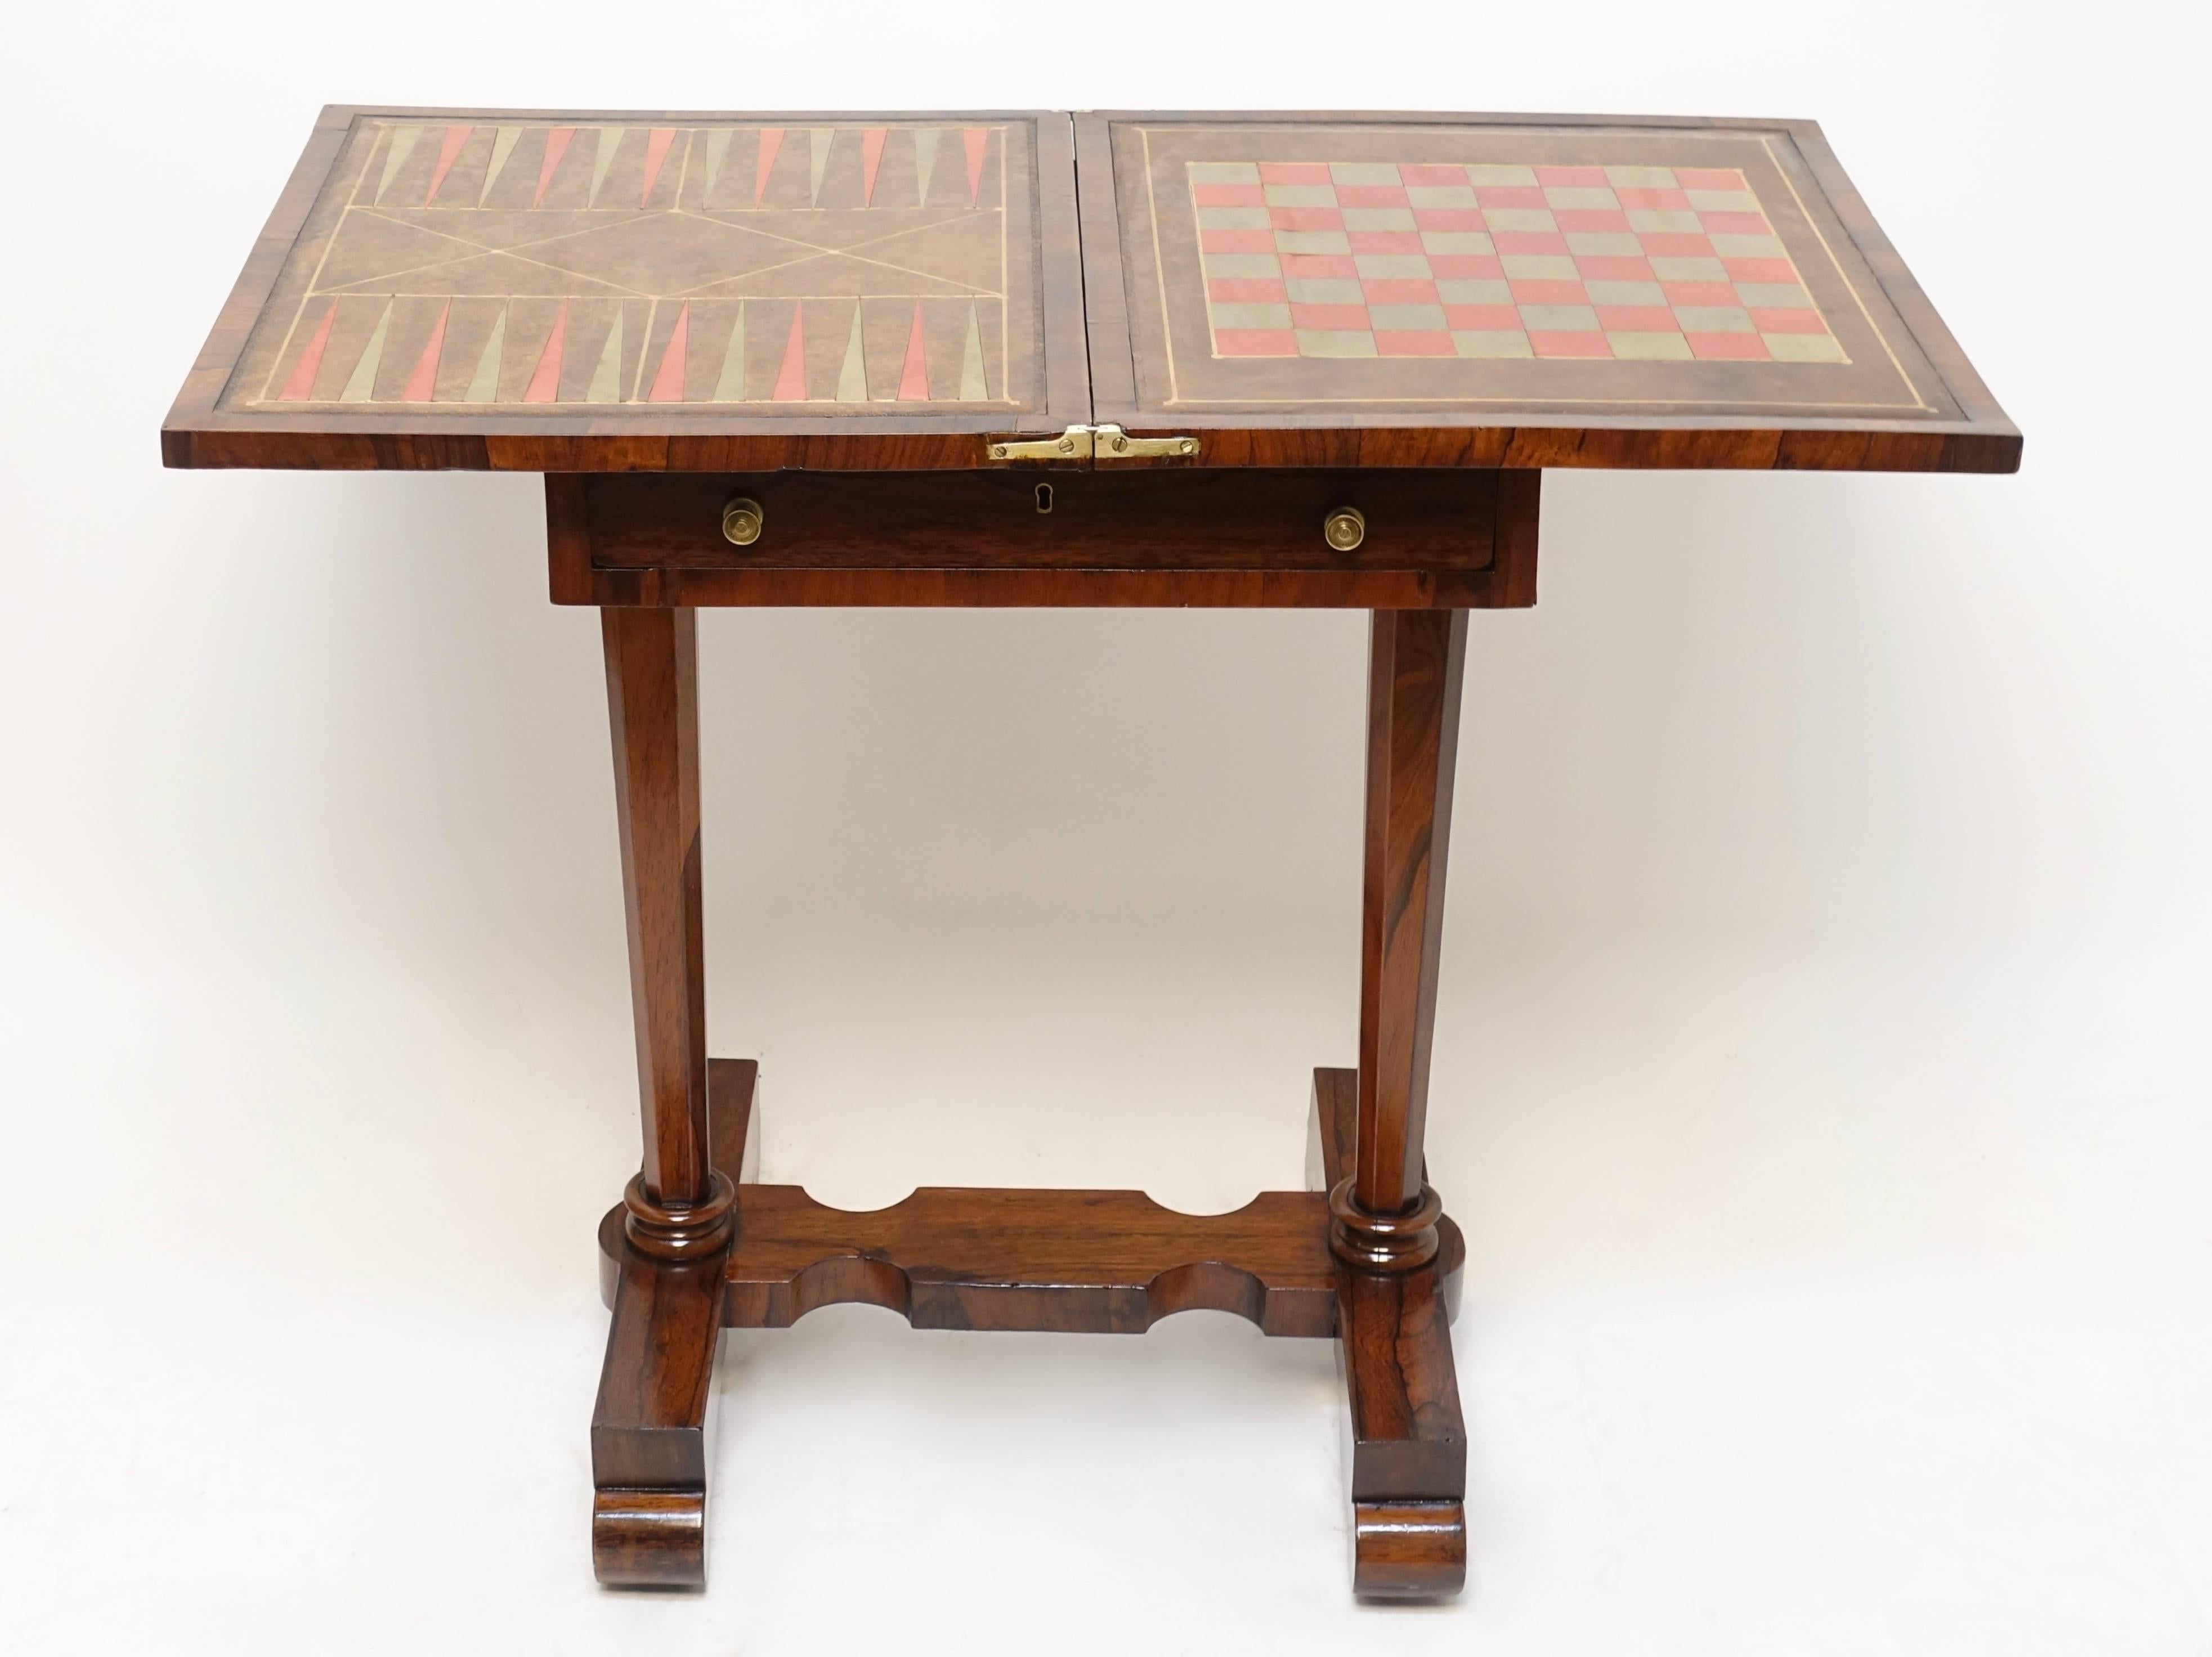 Rosewood side table with a single drawer and inset leather gaming surface. The swivel top opening to a leather lined games board for chess and backgammon. When fully open the table measures 34 inches wide, England, circa 1830.